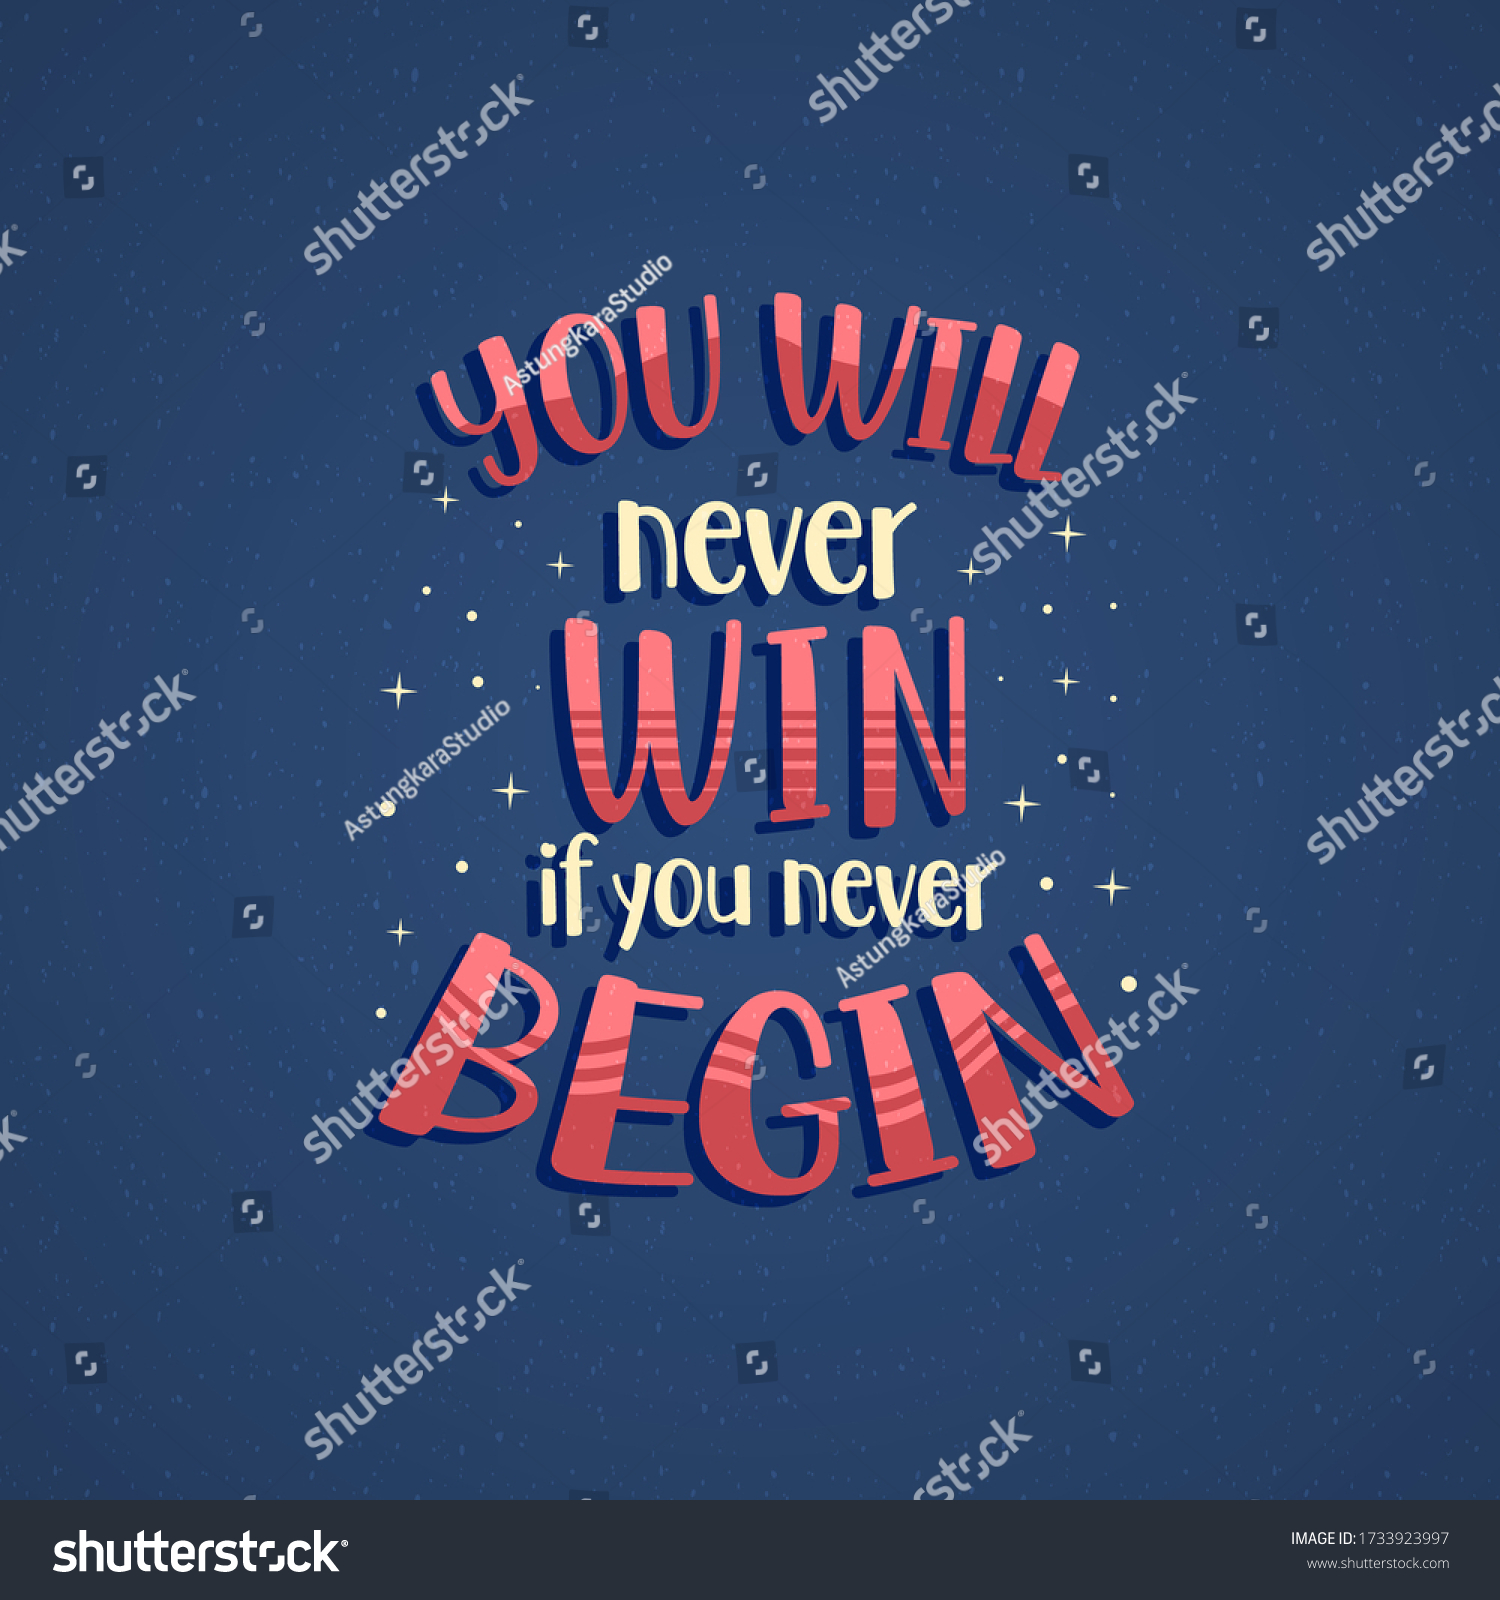 Inspirational Motivation Quotes Poster Design You Stock Vector (Royalty ...